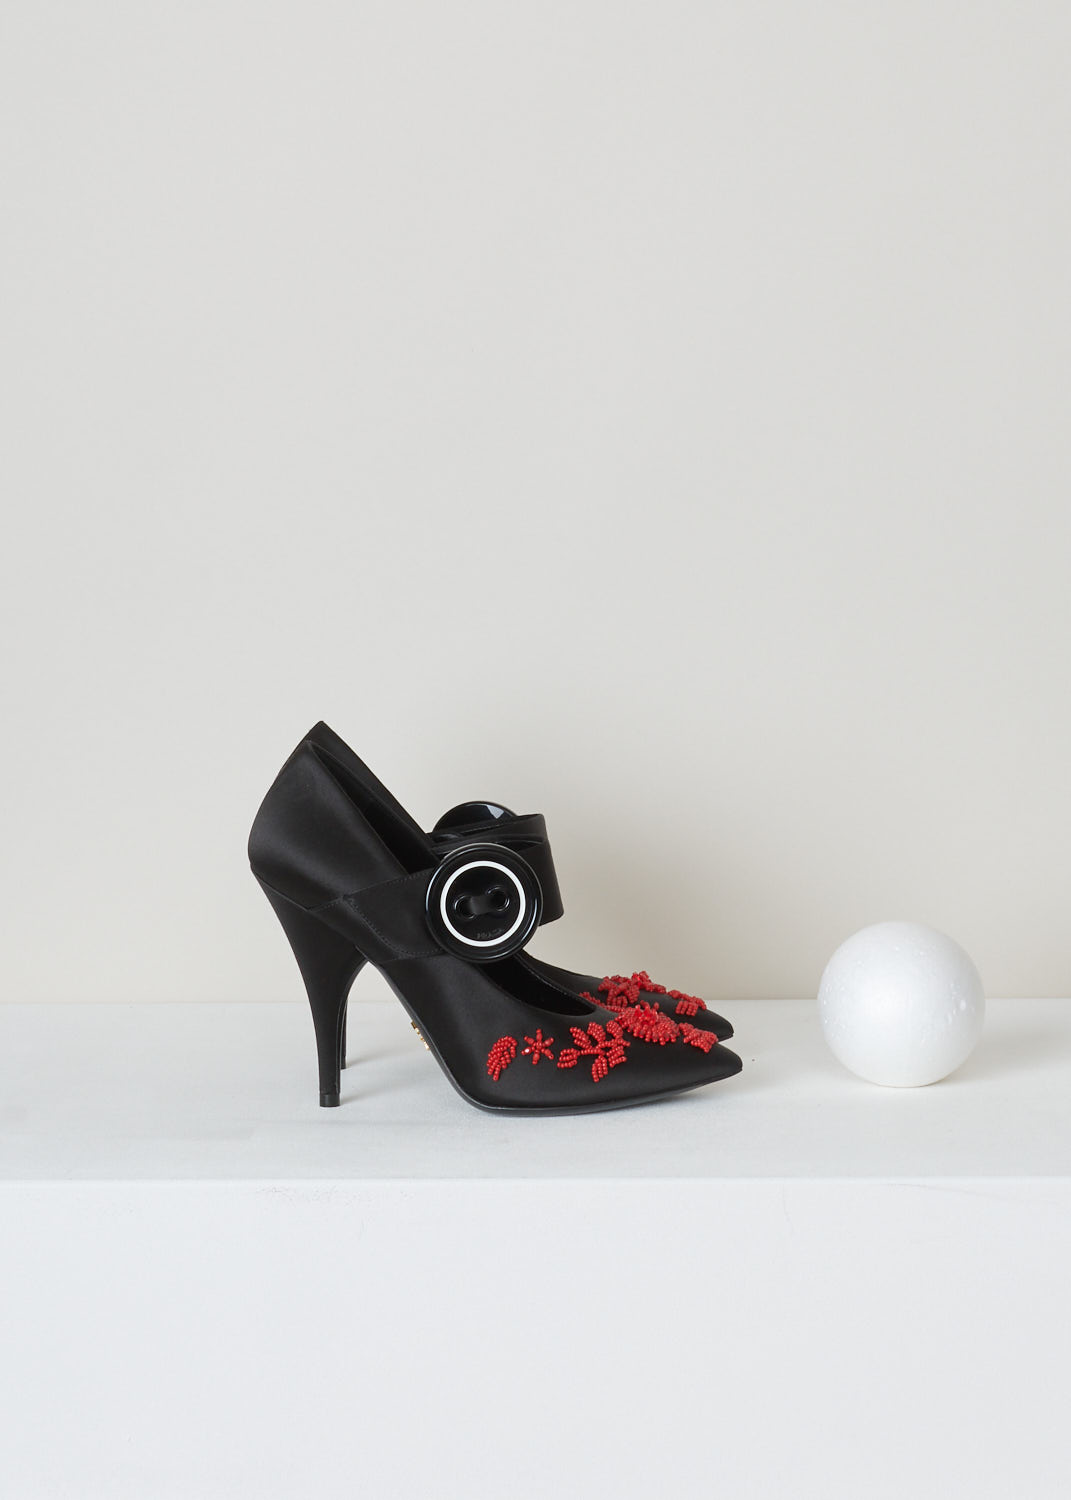 Prada, Red beaded mary jane pump, raso_ricamo_1I011I_Nero_Rosso_F0N98, balck red, side, Very cute mary jane-style pumps, Featuring a red floral design made with beads. Sharp toe section. The strap is decorated one big button just adds to the overall style.

Heel height: 10.5 cm / 4.1 inch.